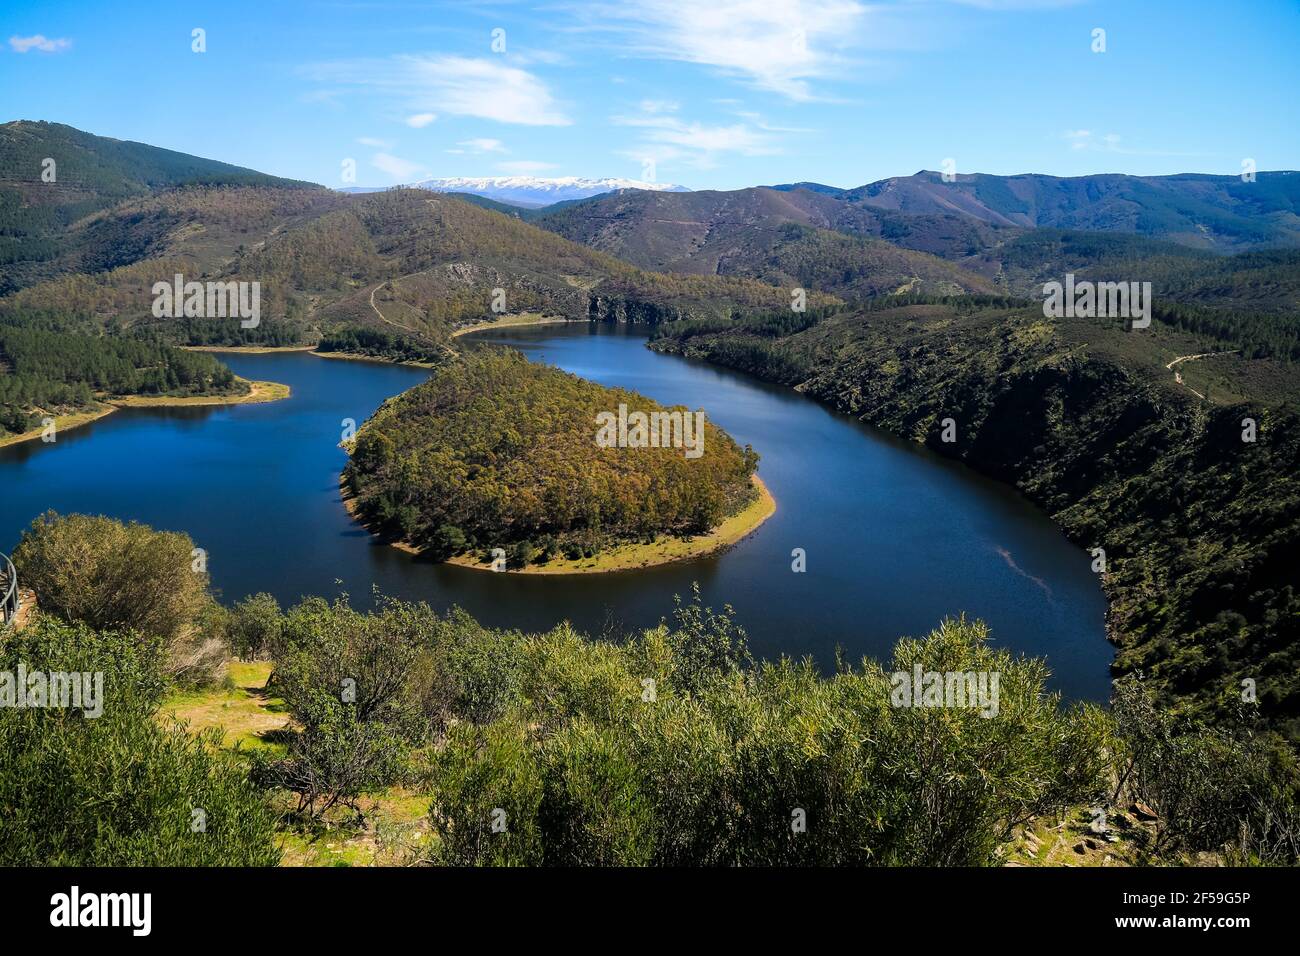 Meander of the river Melero Alagón in a sunny day, Las Hurdes, Extremadura, Spain. Stock Photo